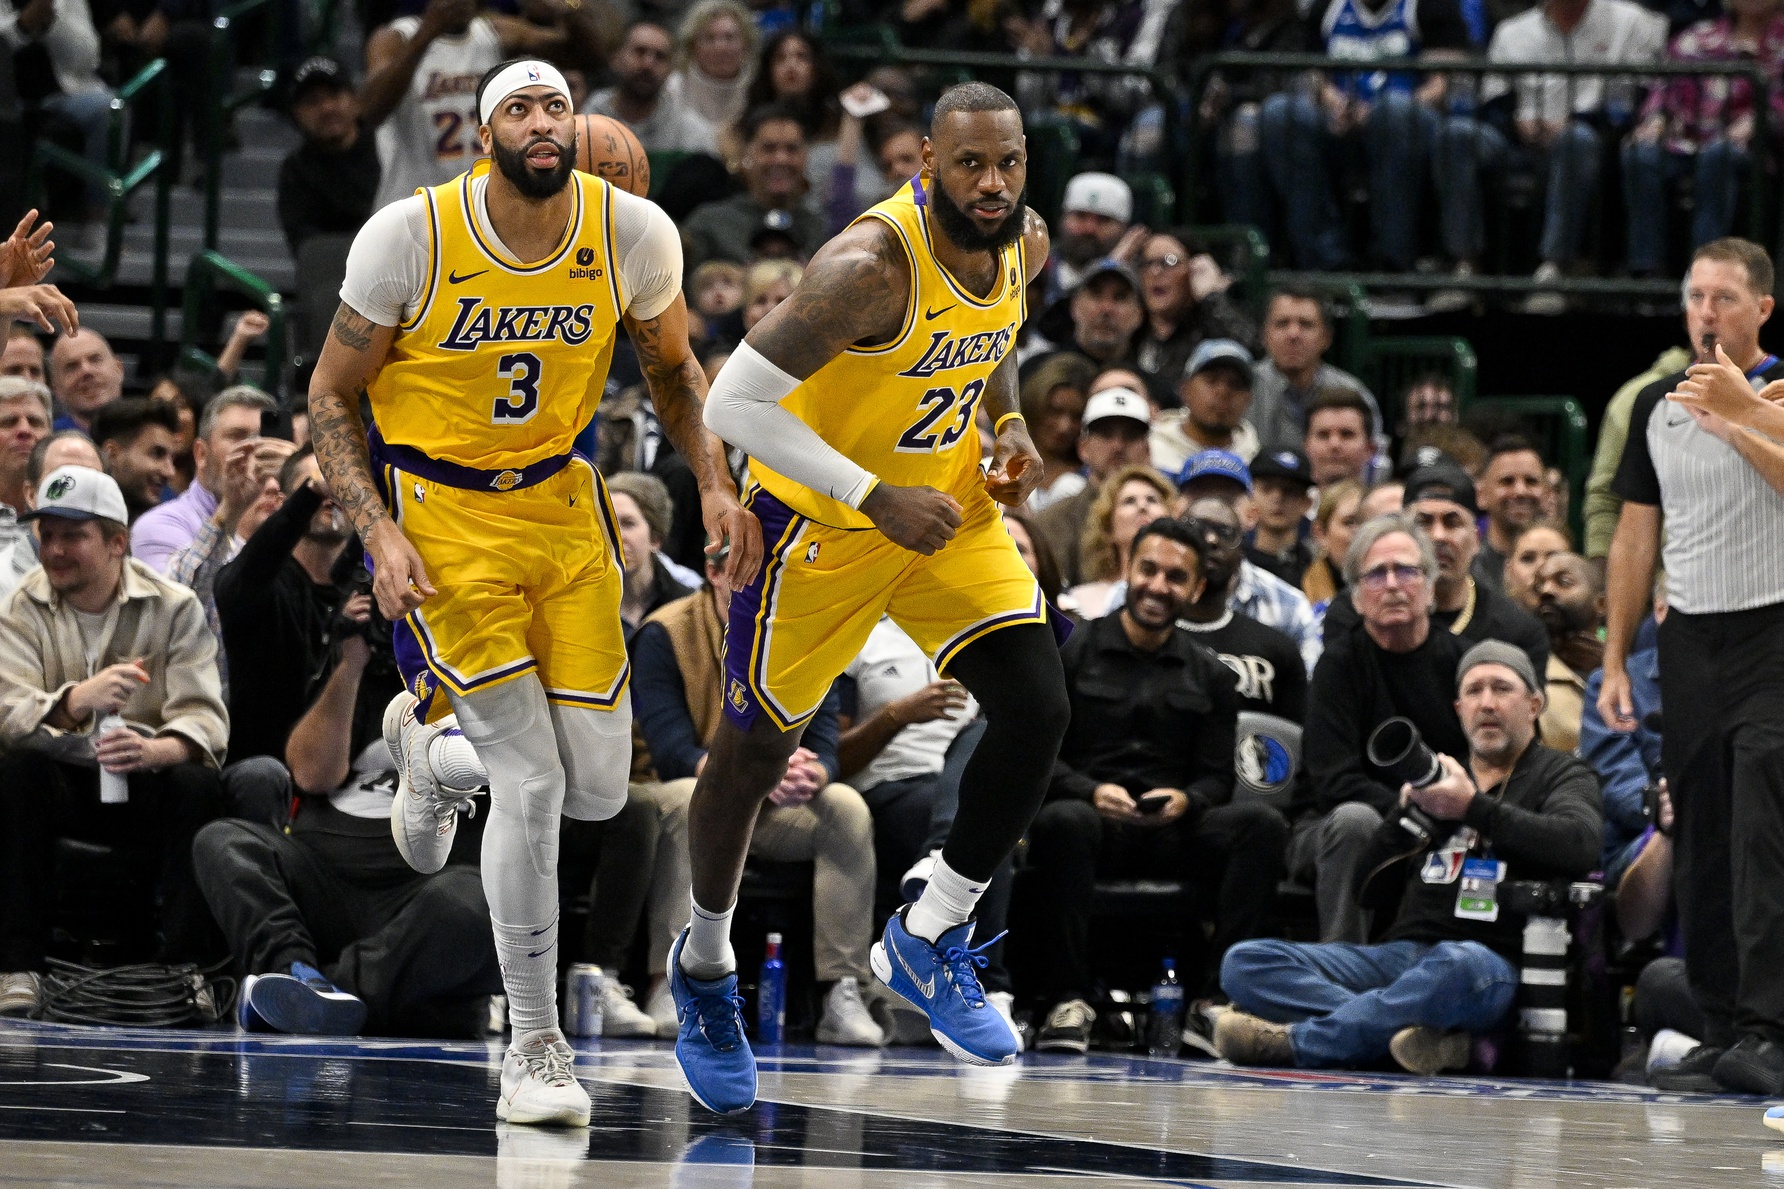 Dec 12, 2023; Dallas, Texas, USA; Los Angeles Lakers forward Anthony Davis (3) and forward LeBron James (23) in action during the game between the Dallas Mavericks and the Los Angeles Lakers at the American Airlines Center. Mandatory Credit: Jerome Miron-USA TODAY Sports